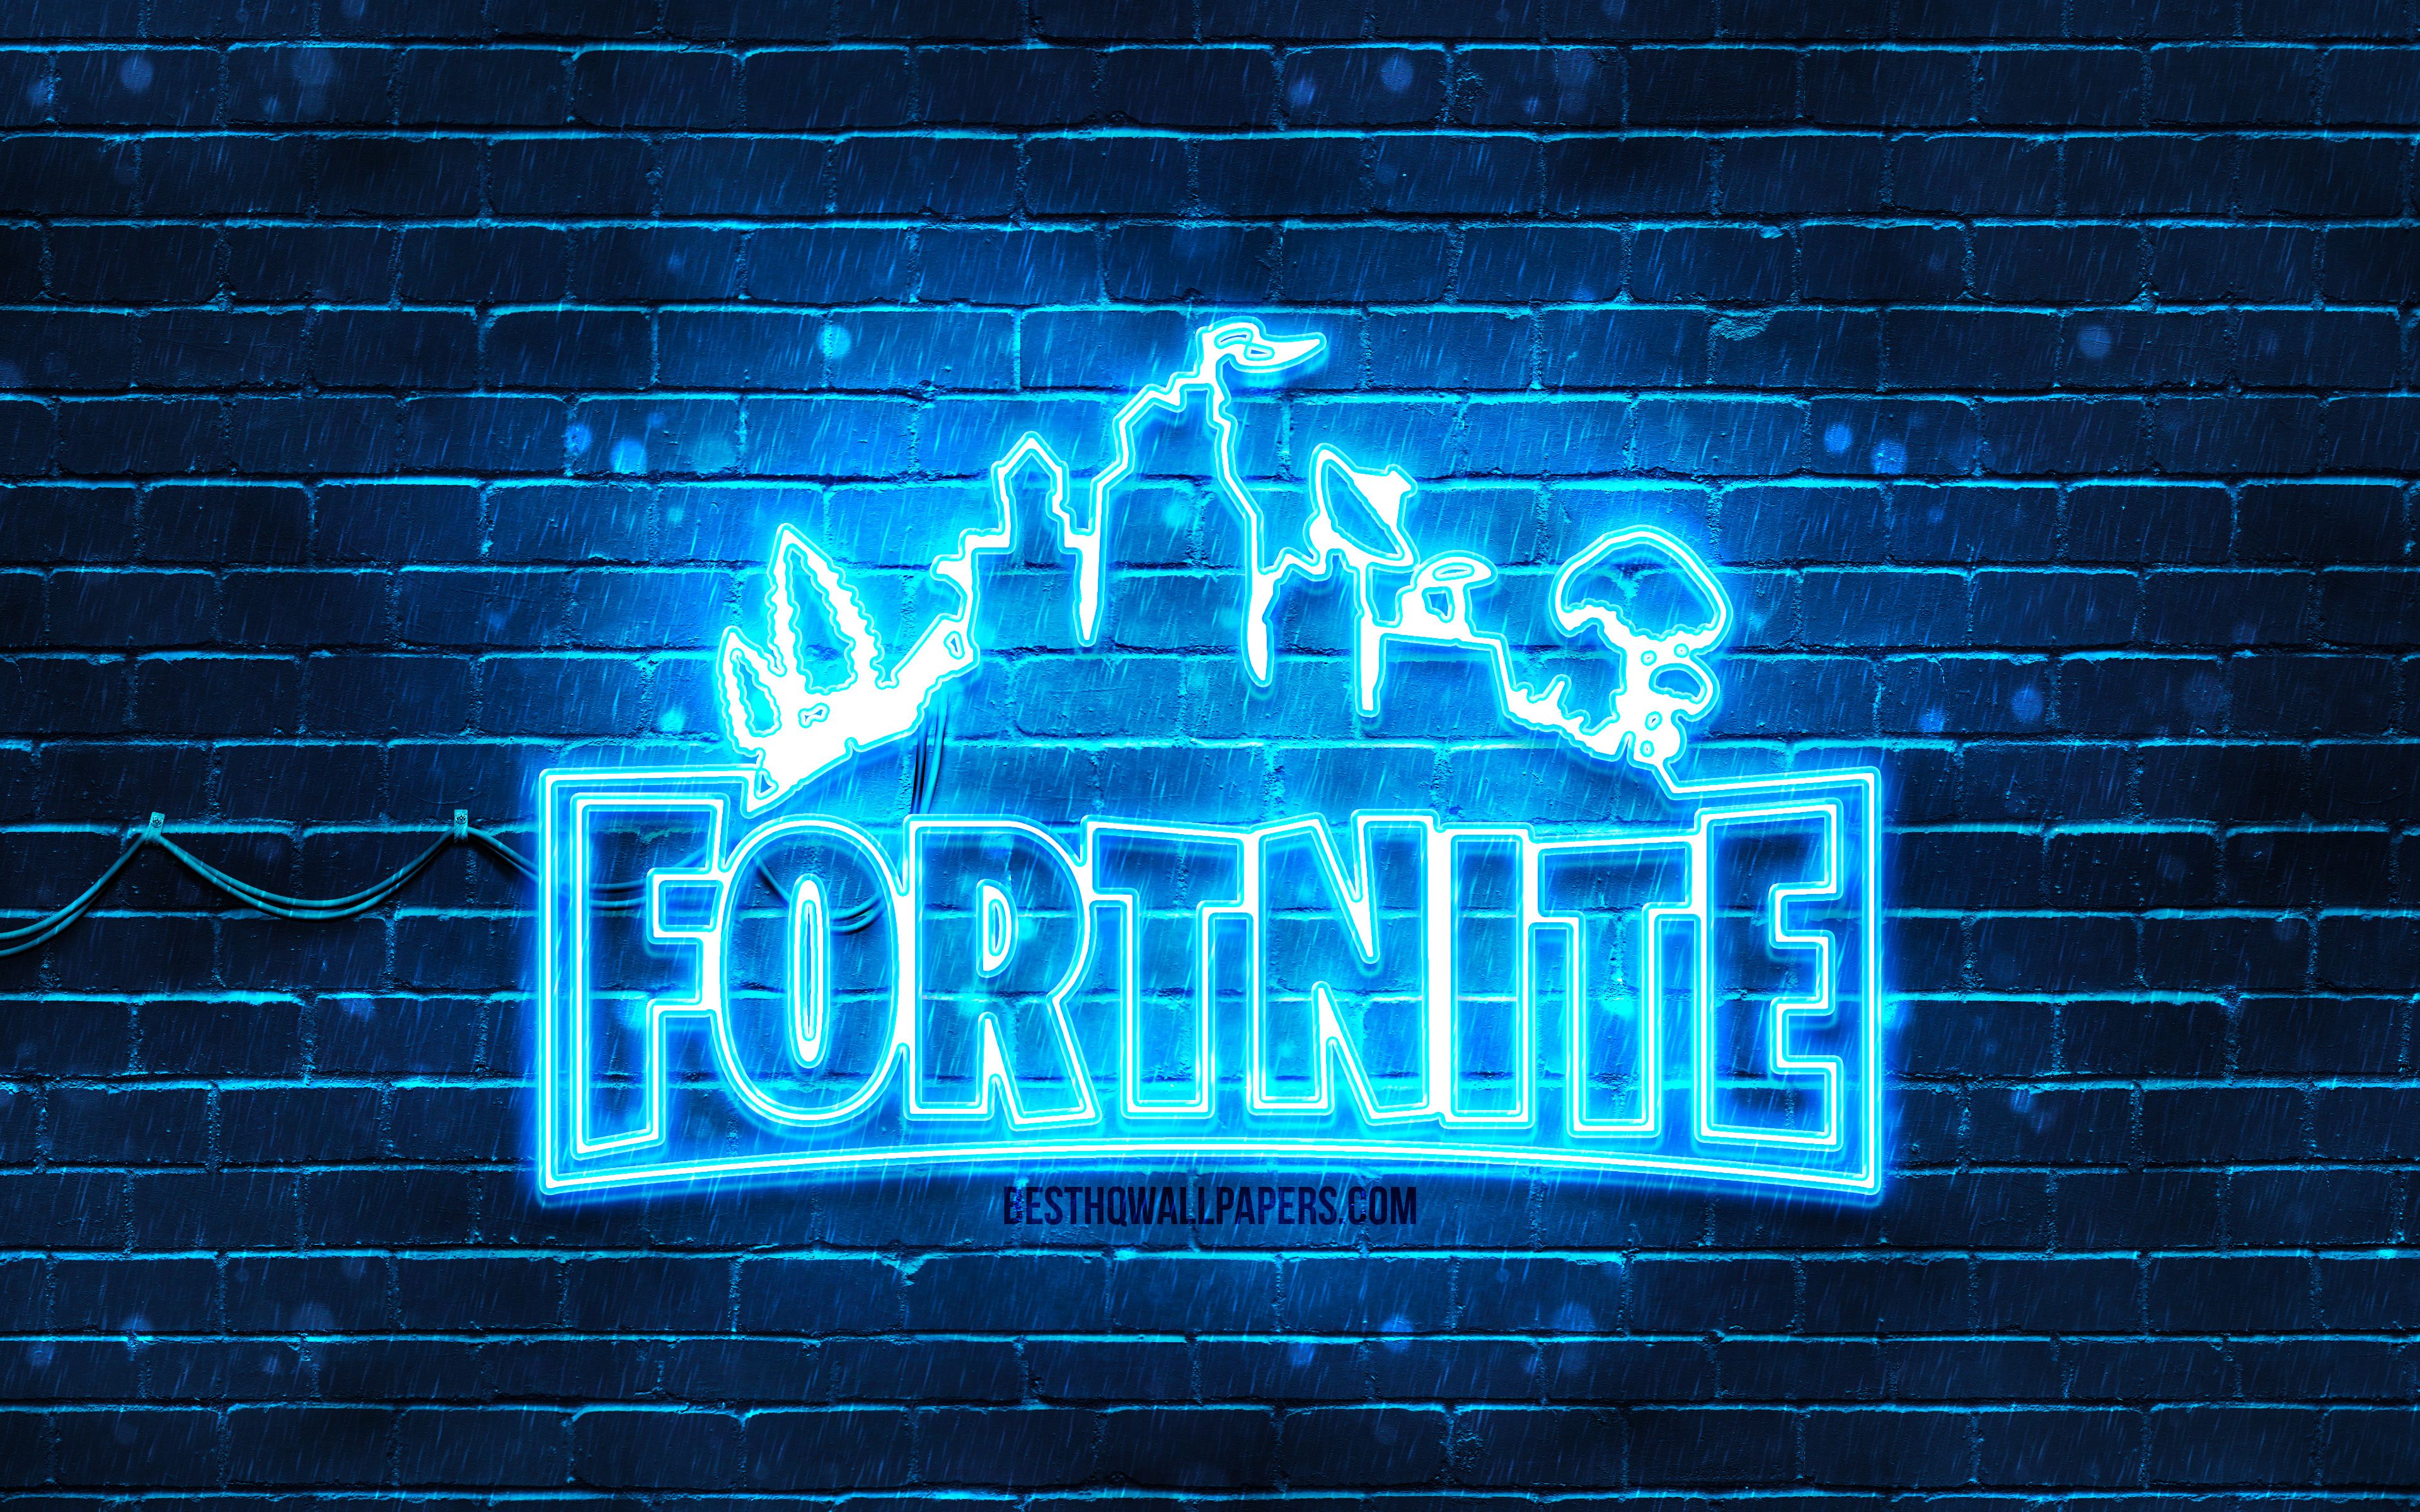 Download wallpaper Fortnite blue logo, 4k, blue brickwall, Fortnite logo, 2020 games, Fortnite neon logo, Fortnite for desktop with resolution 3840x2400. High Quality HD picture wallpaper